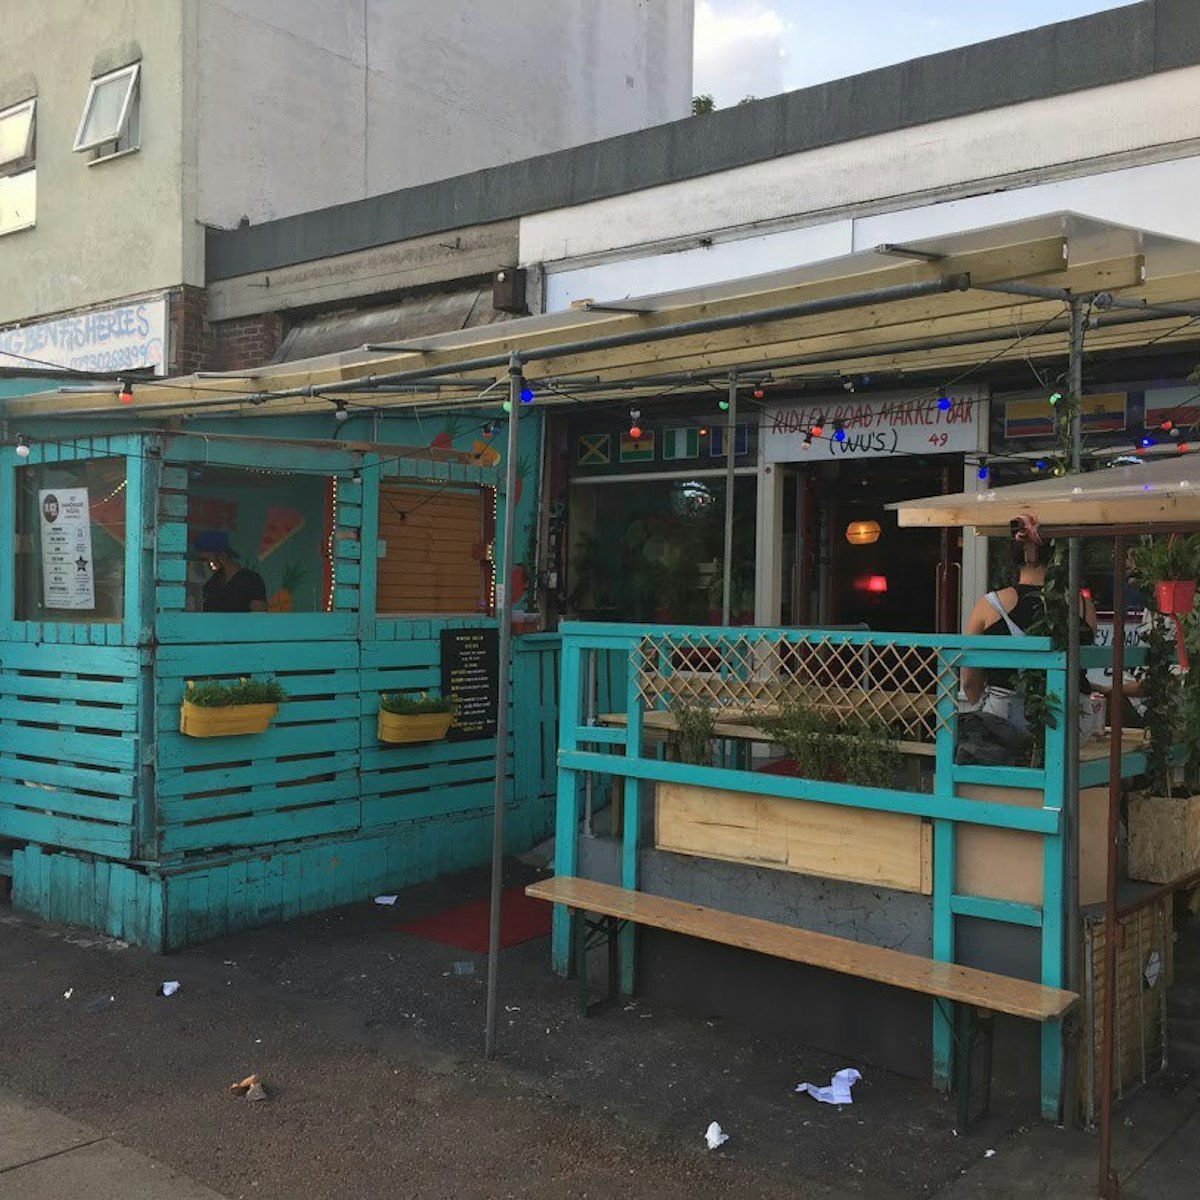 Outside Ridley Road Market Bar, a tropical-themed den in Dalston